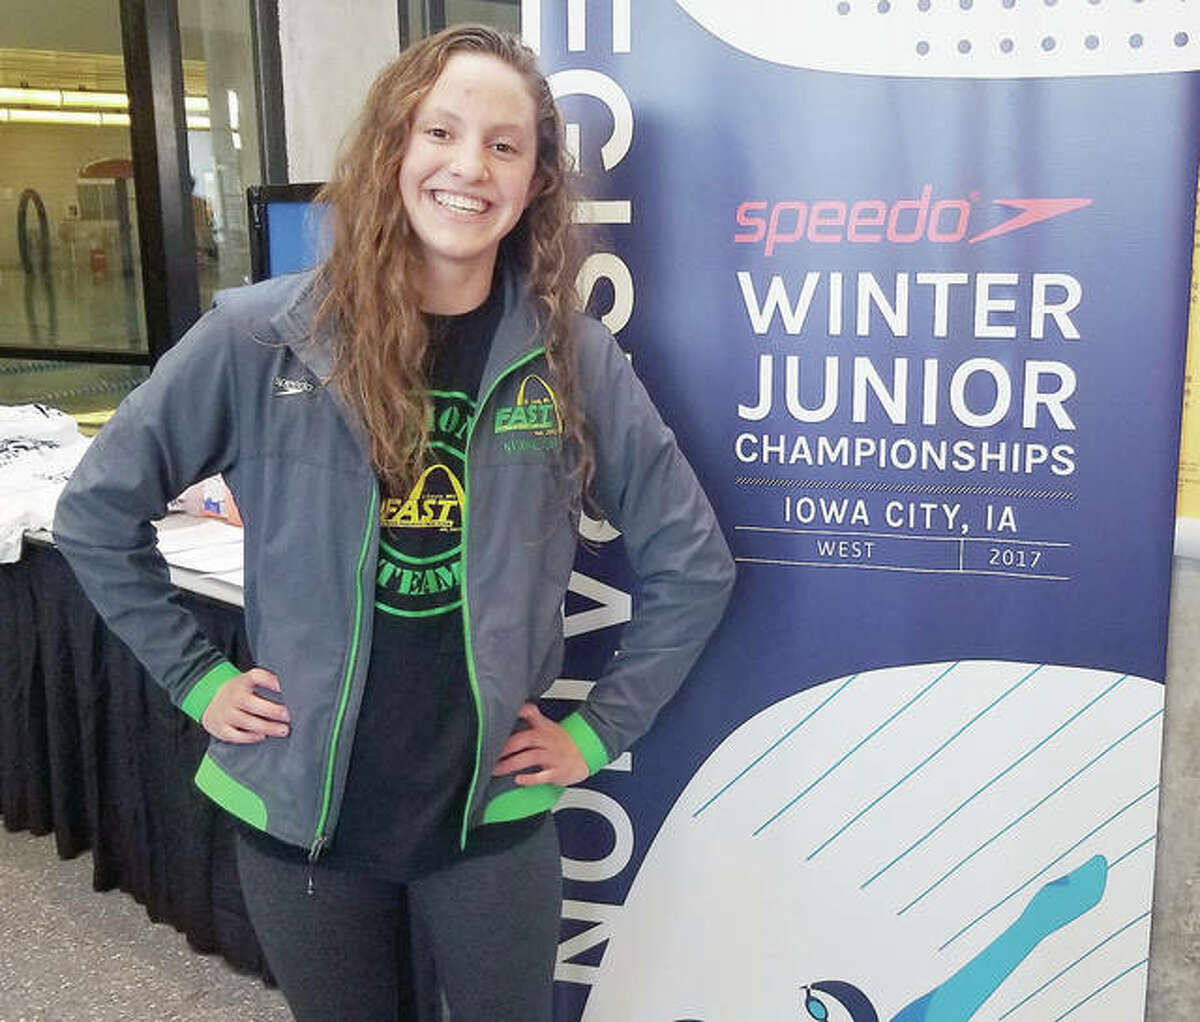 Eleni Kotzamanis, 14, of Godfrey is making waves as a member of the Flyers Aquatic Swim Team in St. Louis. She is pictured at the recent Speedo Winter Junior Championships in Iowa City, Iowa.